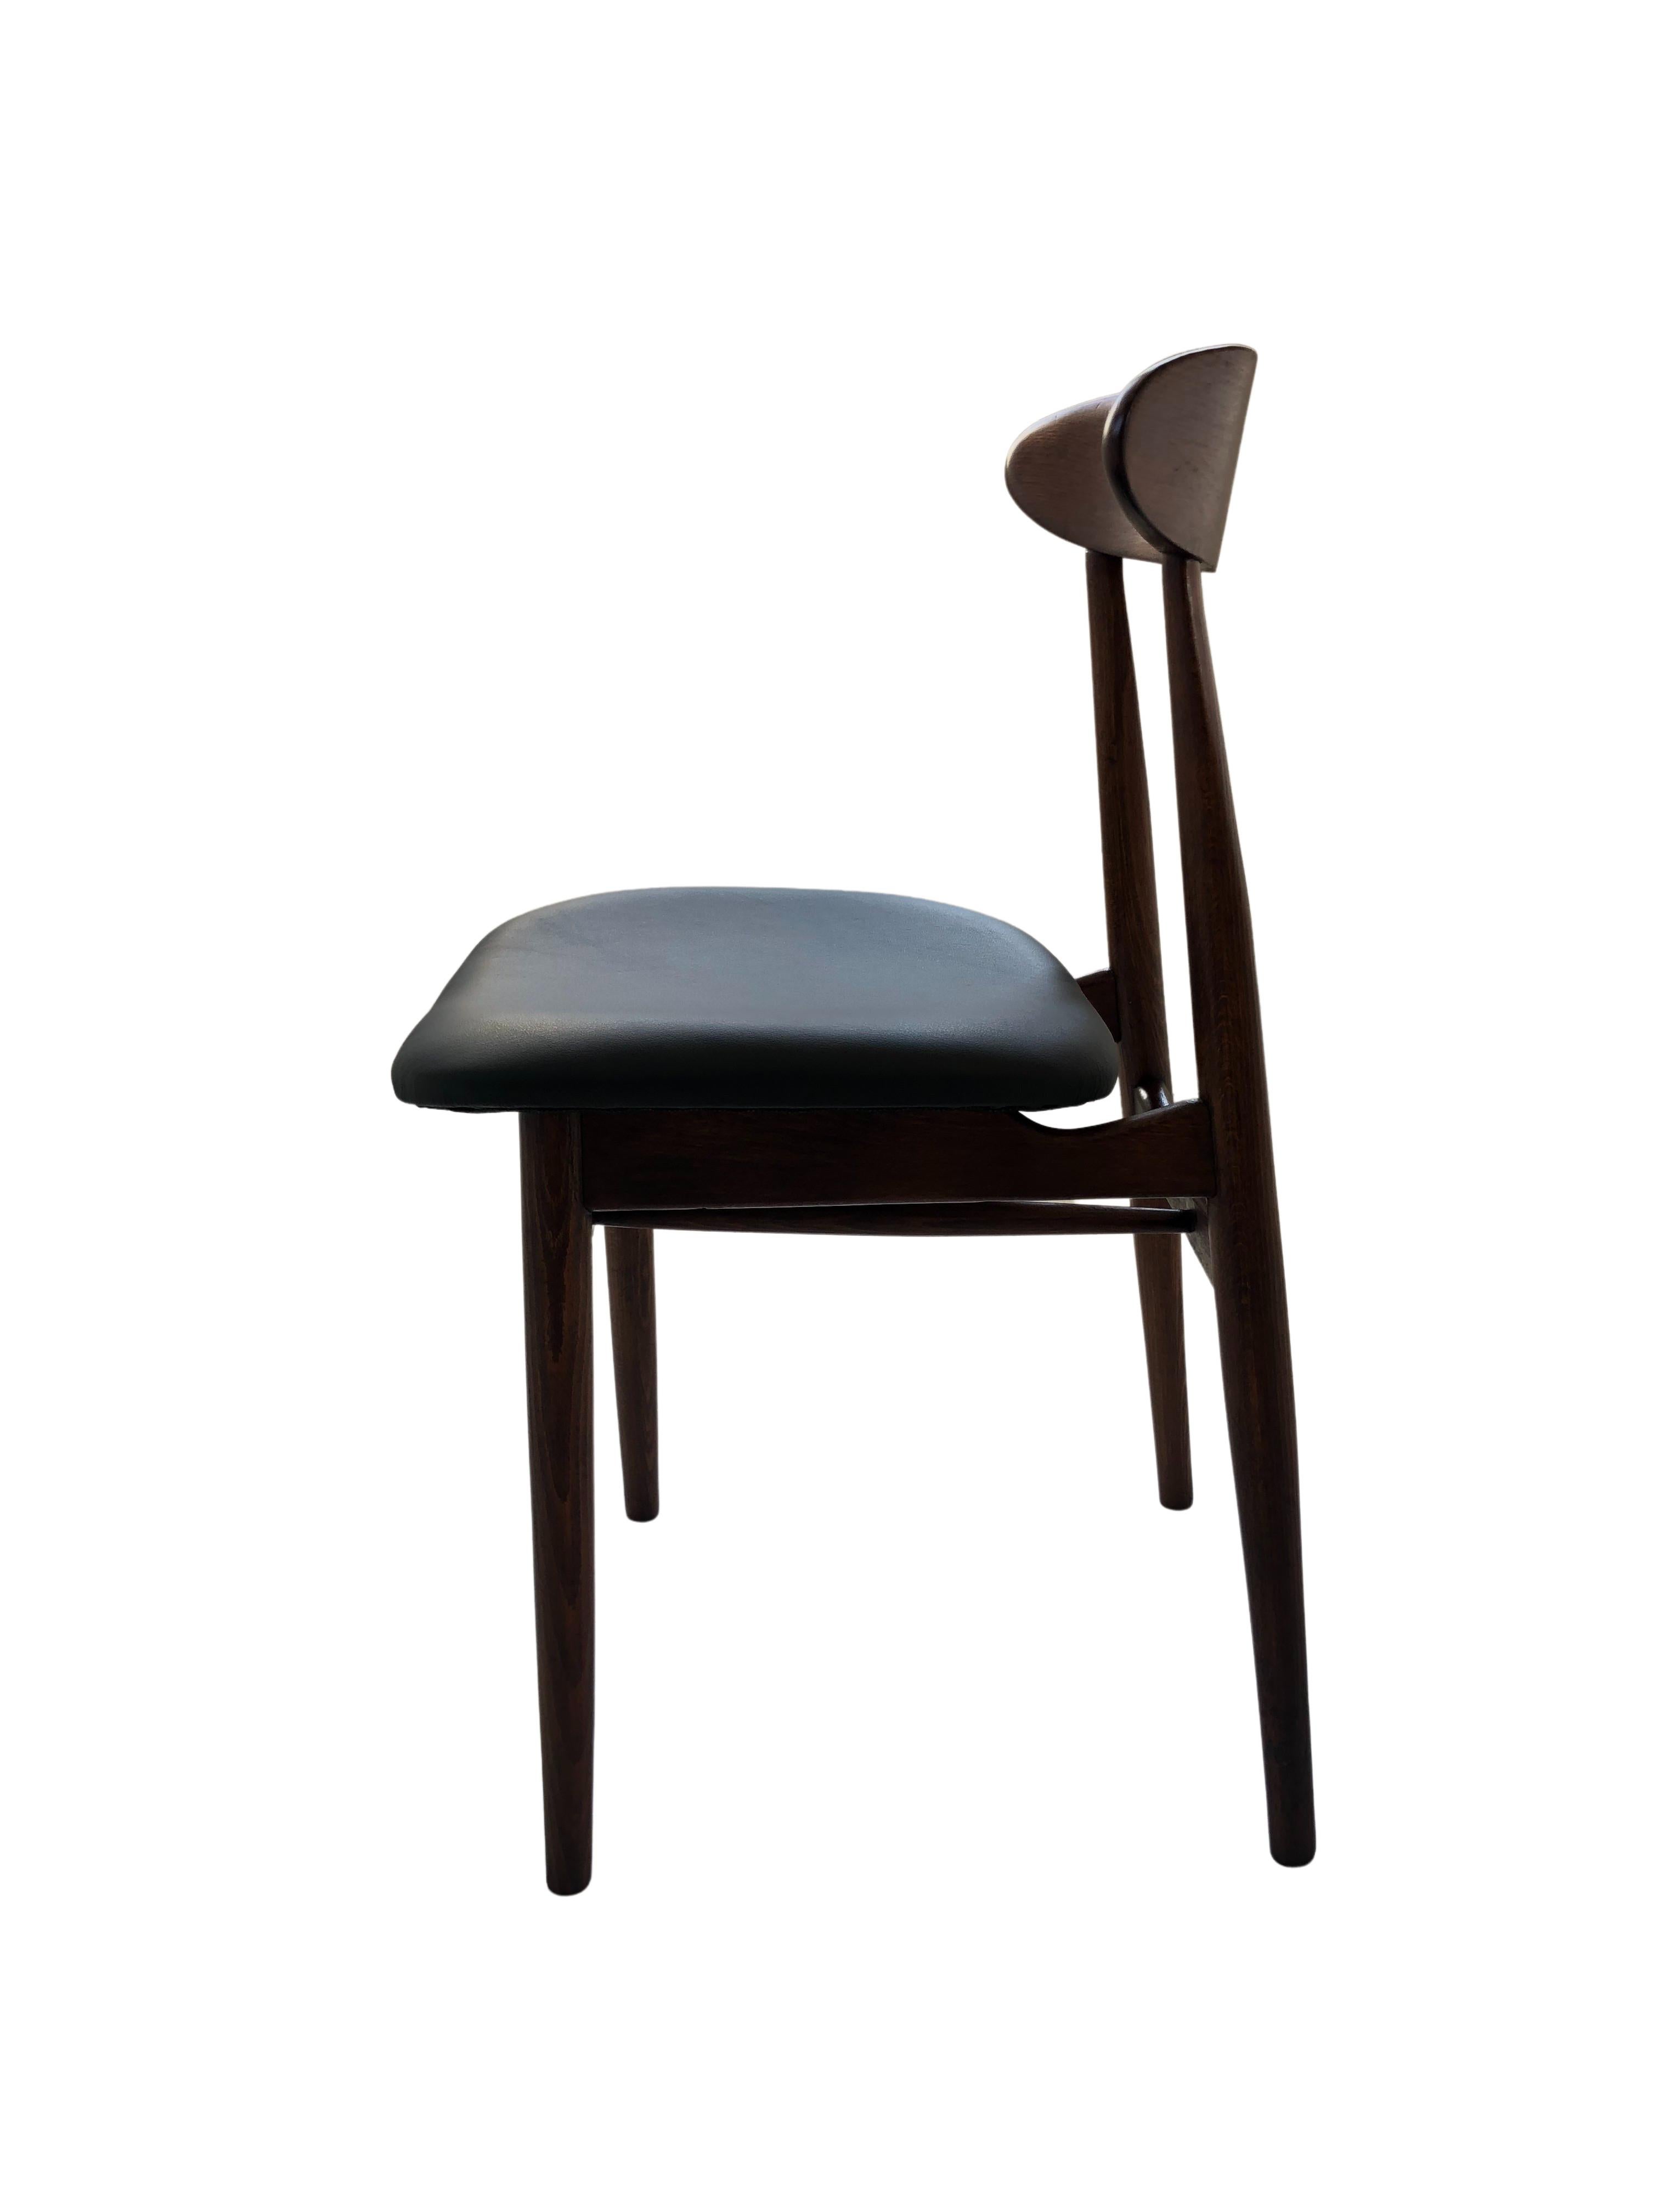 20th Century Mid-Century Black Leather Dining Chairs by Rajmund Hałas, 1960s, Set of 2